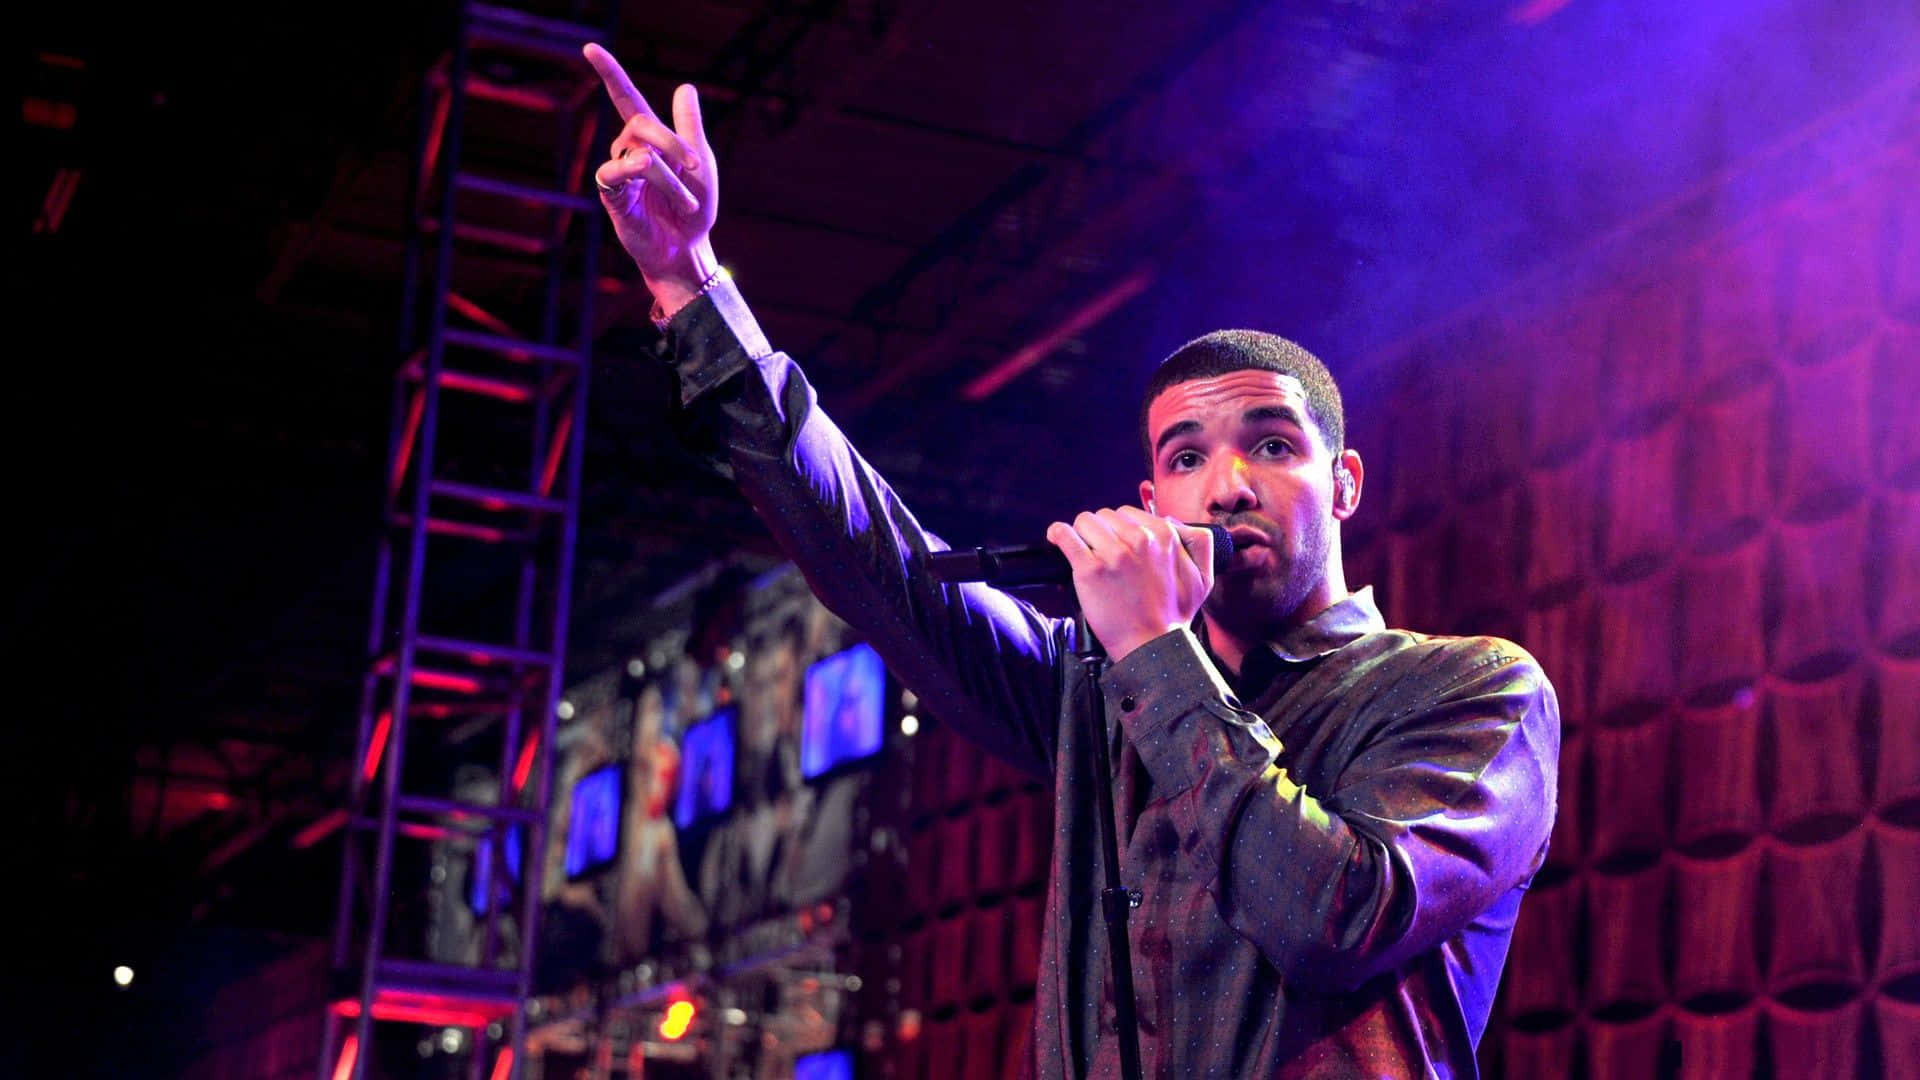 Drake confidently performing on stage